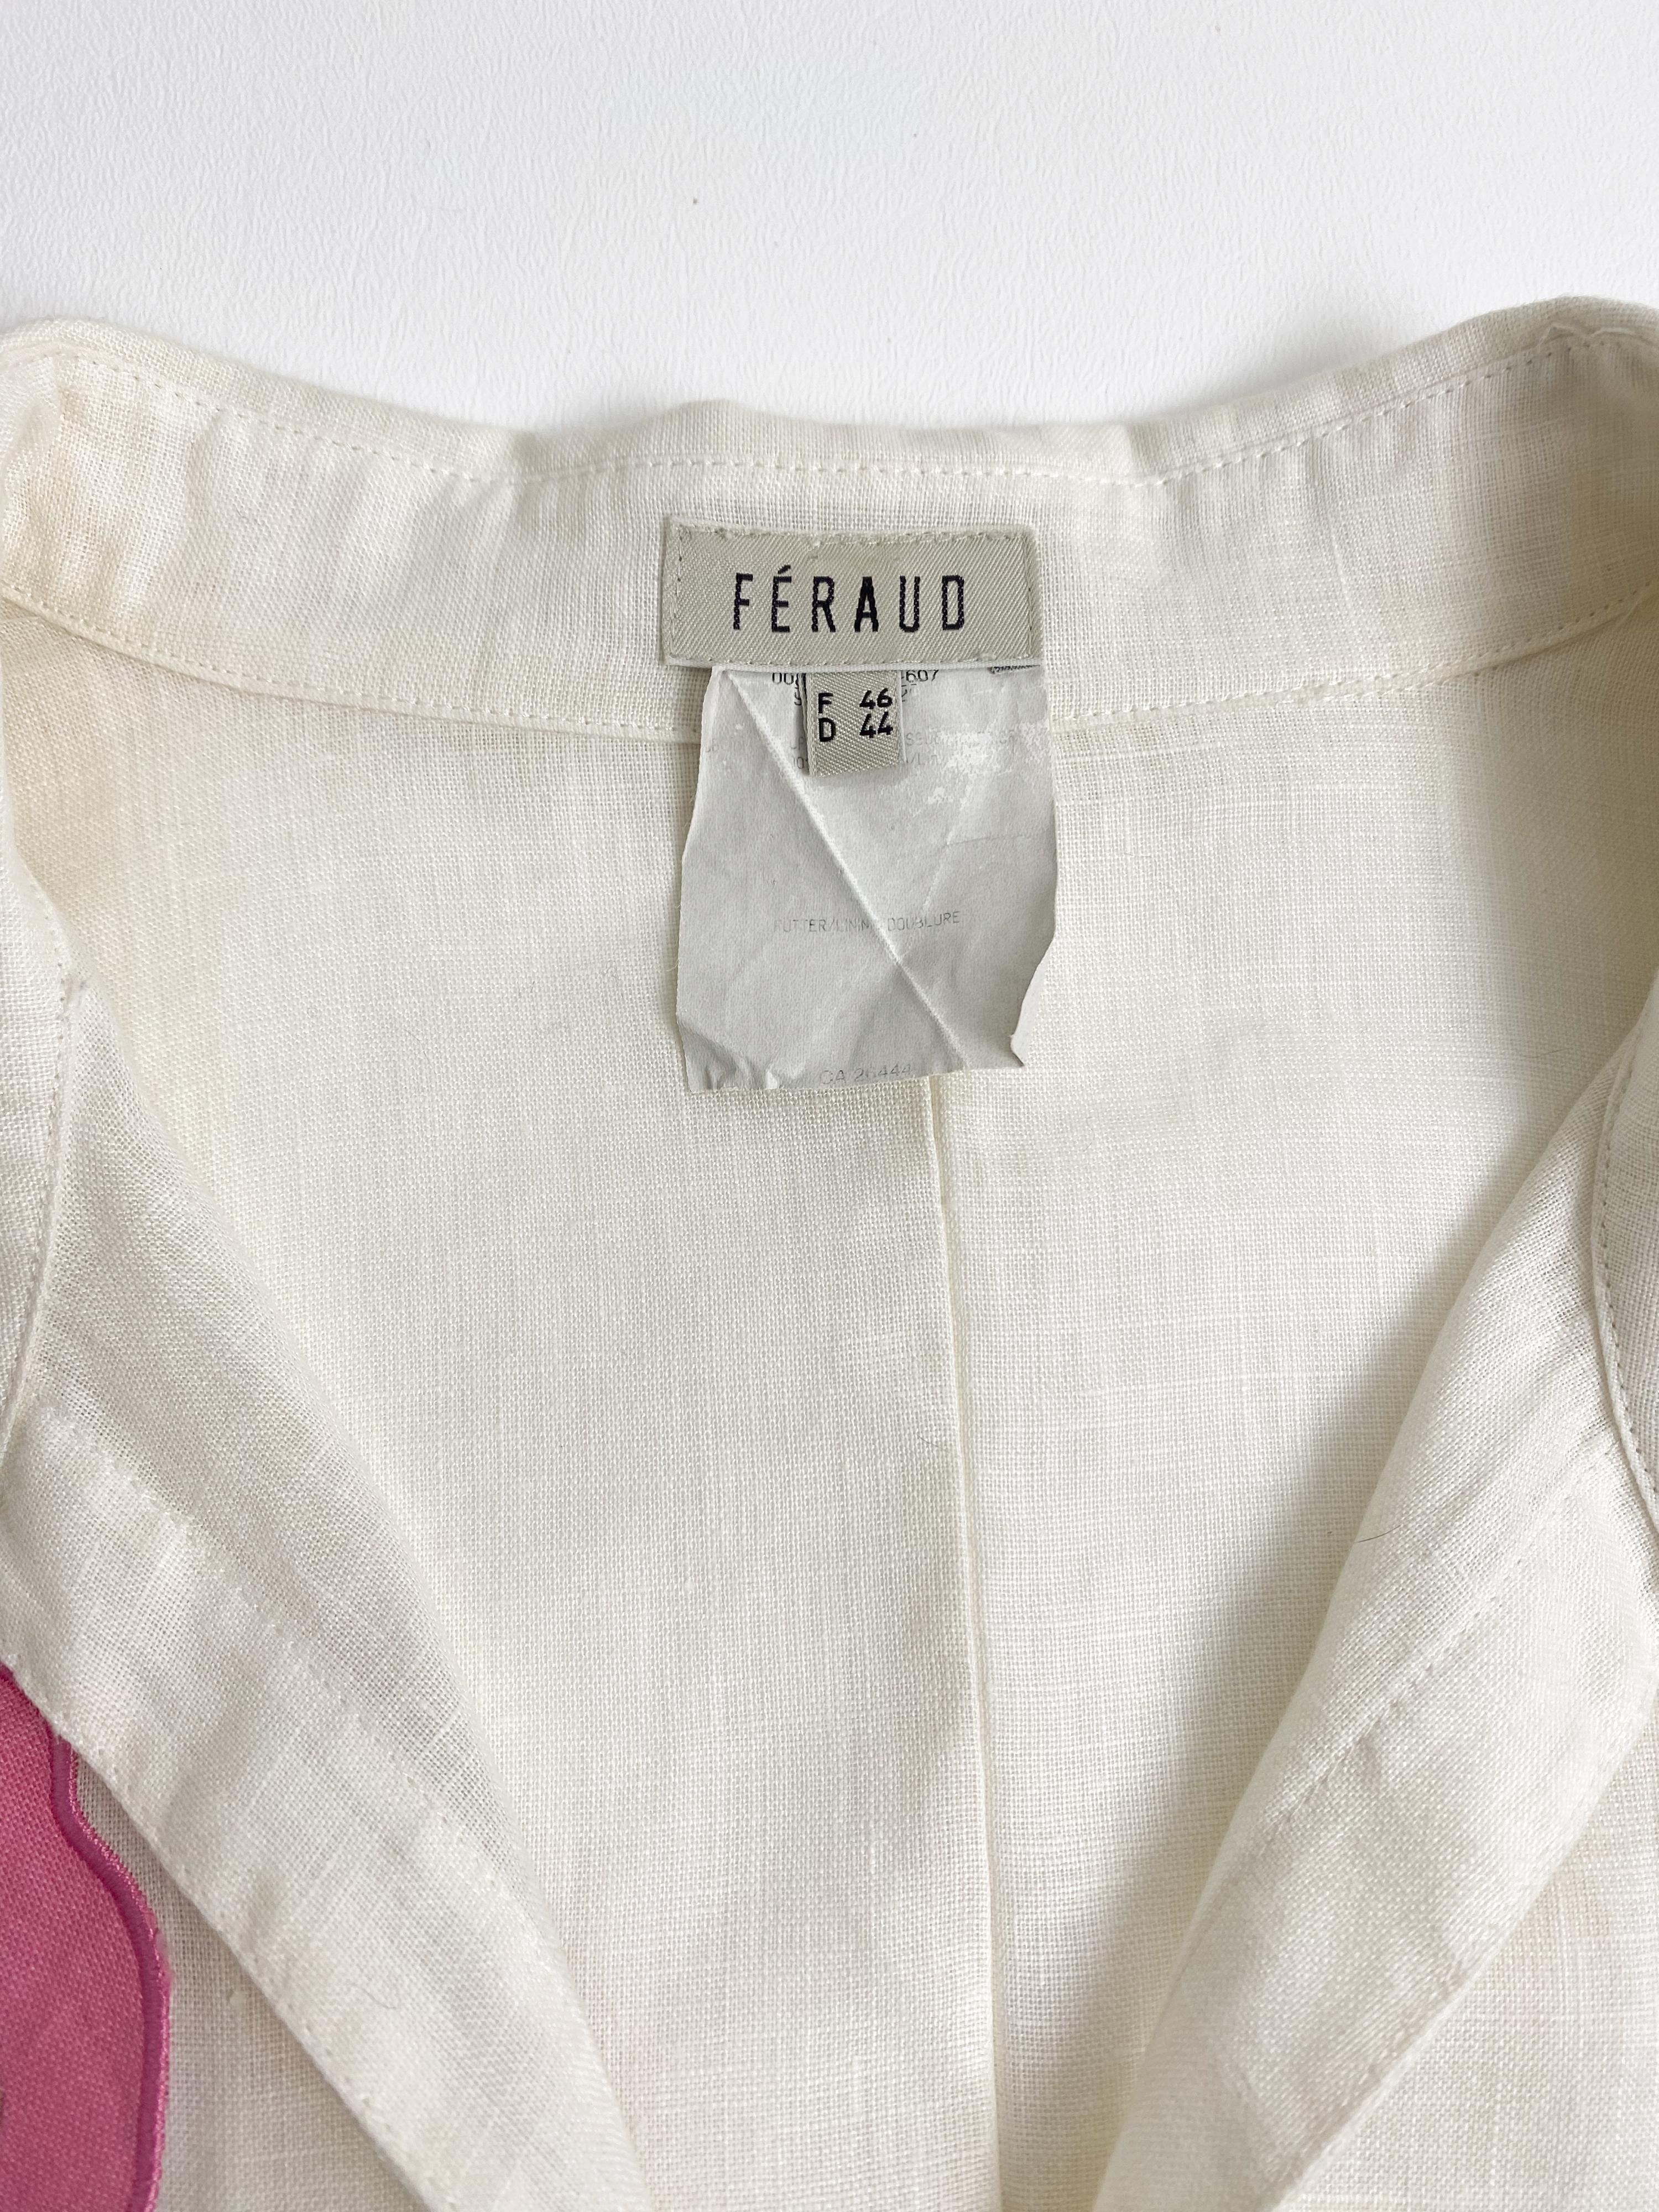 Vintage 1990s Louis Feraud Linen and Cotton Blouse Top with Embroidery Size L For Sale 7